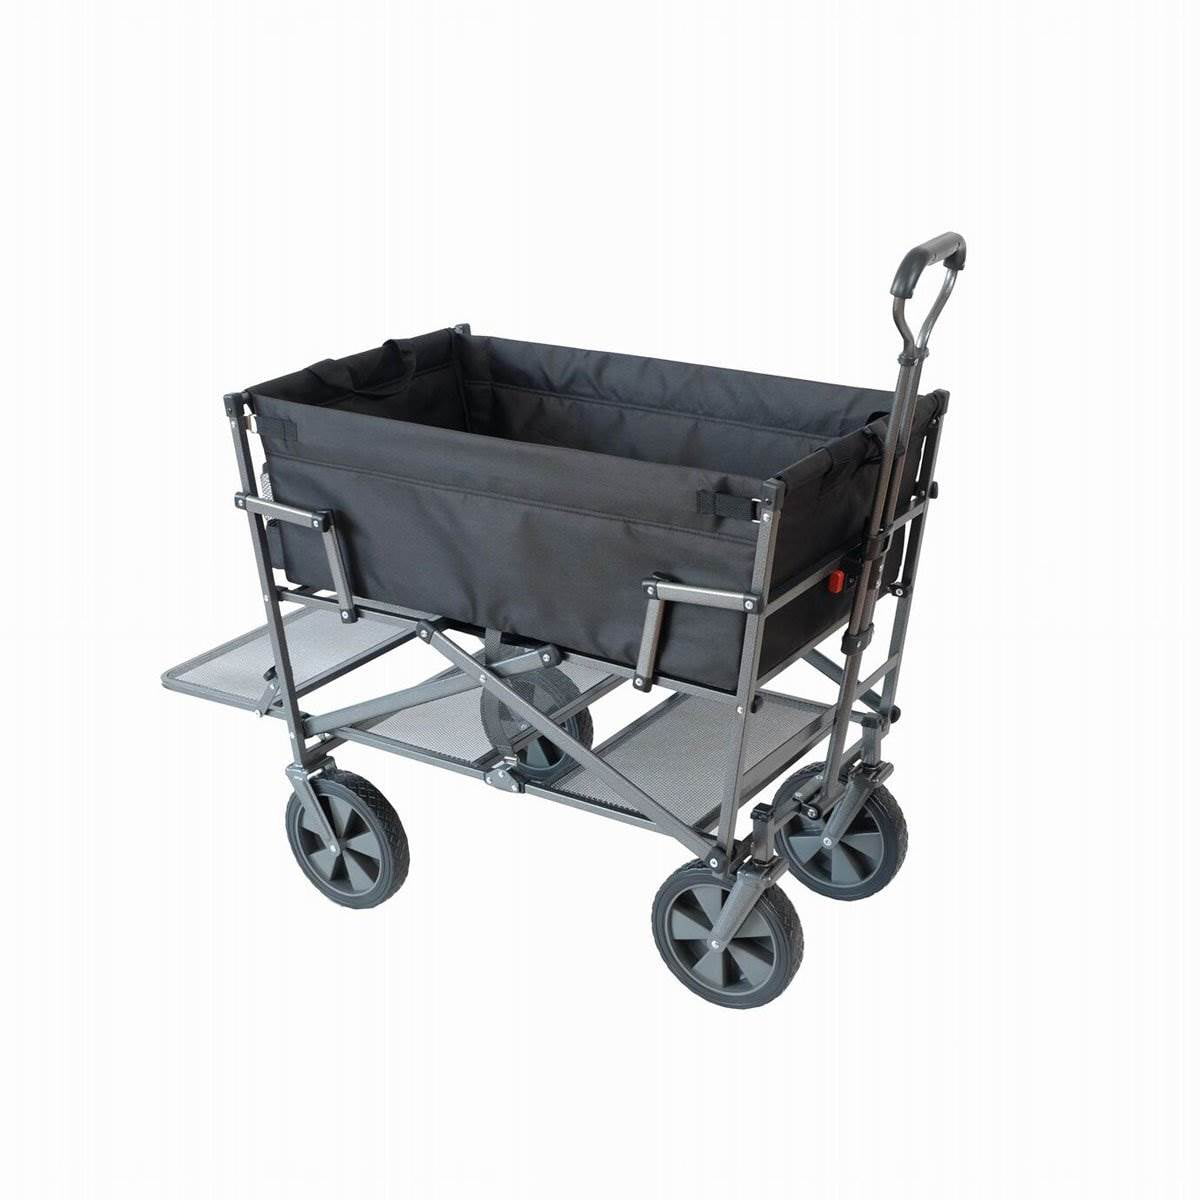 Mac Sports Xtender 52" Extra Long Collapsible Utility Storage Wagon Cart Black 